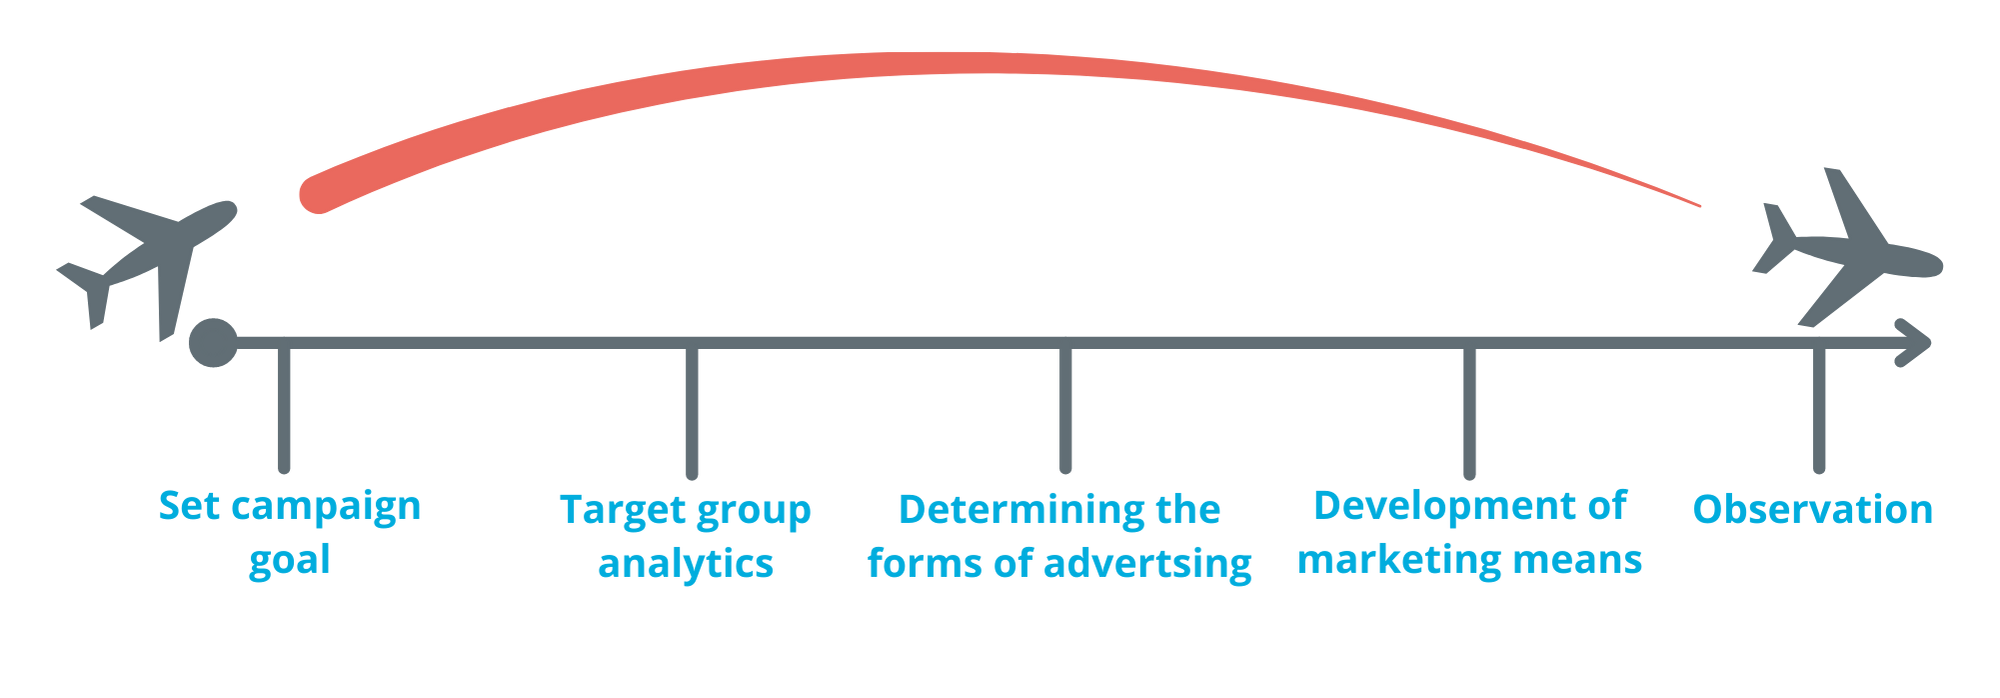 The graphic shows a timeline with the stages of a marketing campaign. Point 1: Determine campaign goals, Point 2: The target group analysis, Point 3: Determine the form(s) of advertising, Point 4: Develop the marketing tools, Point 6: Observation.